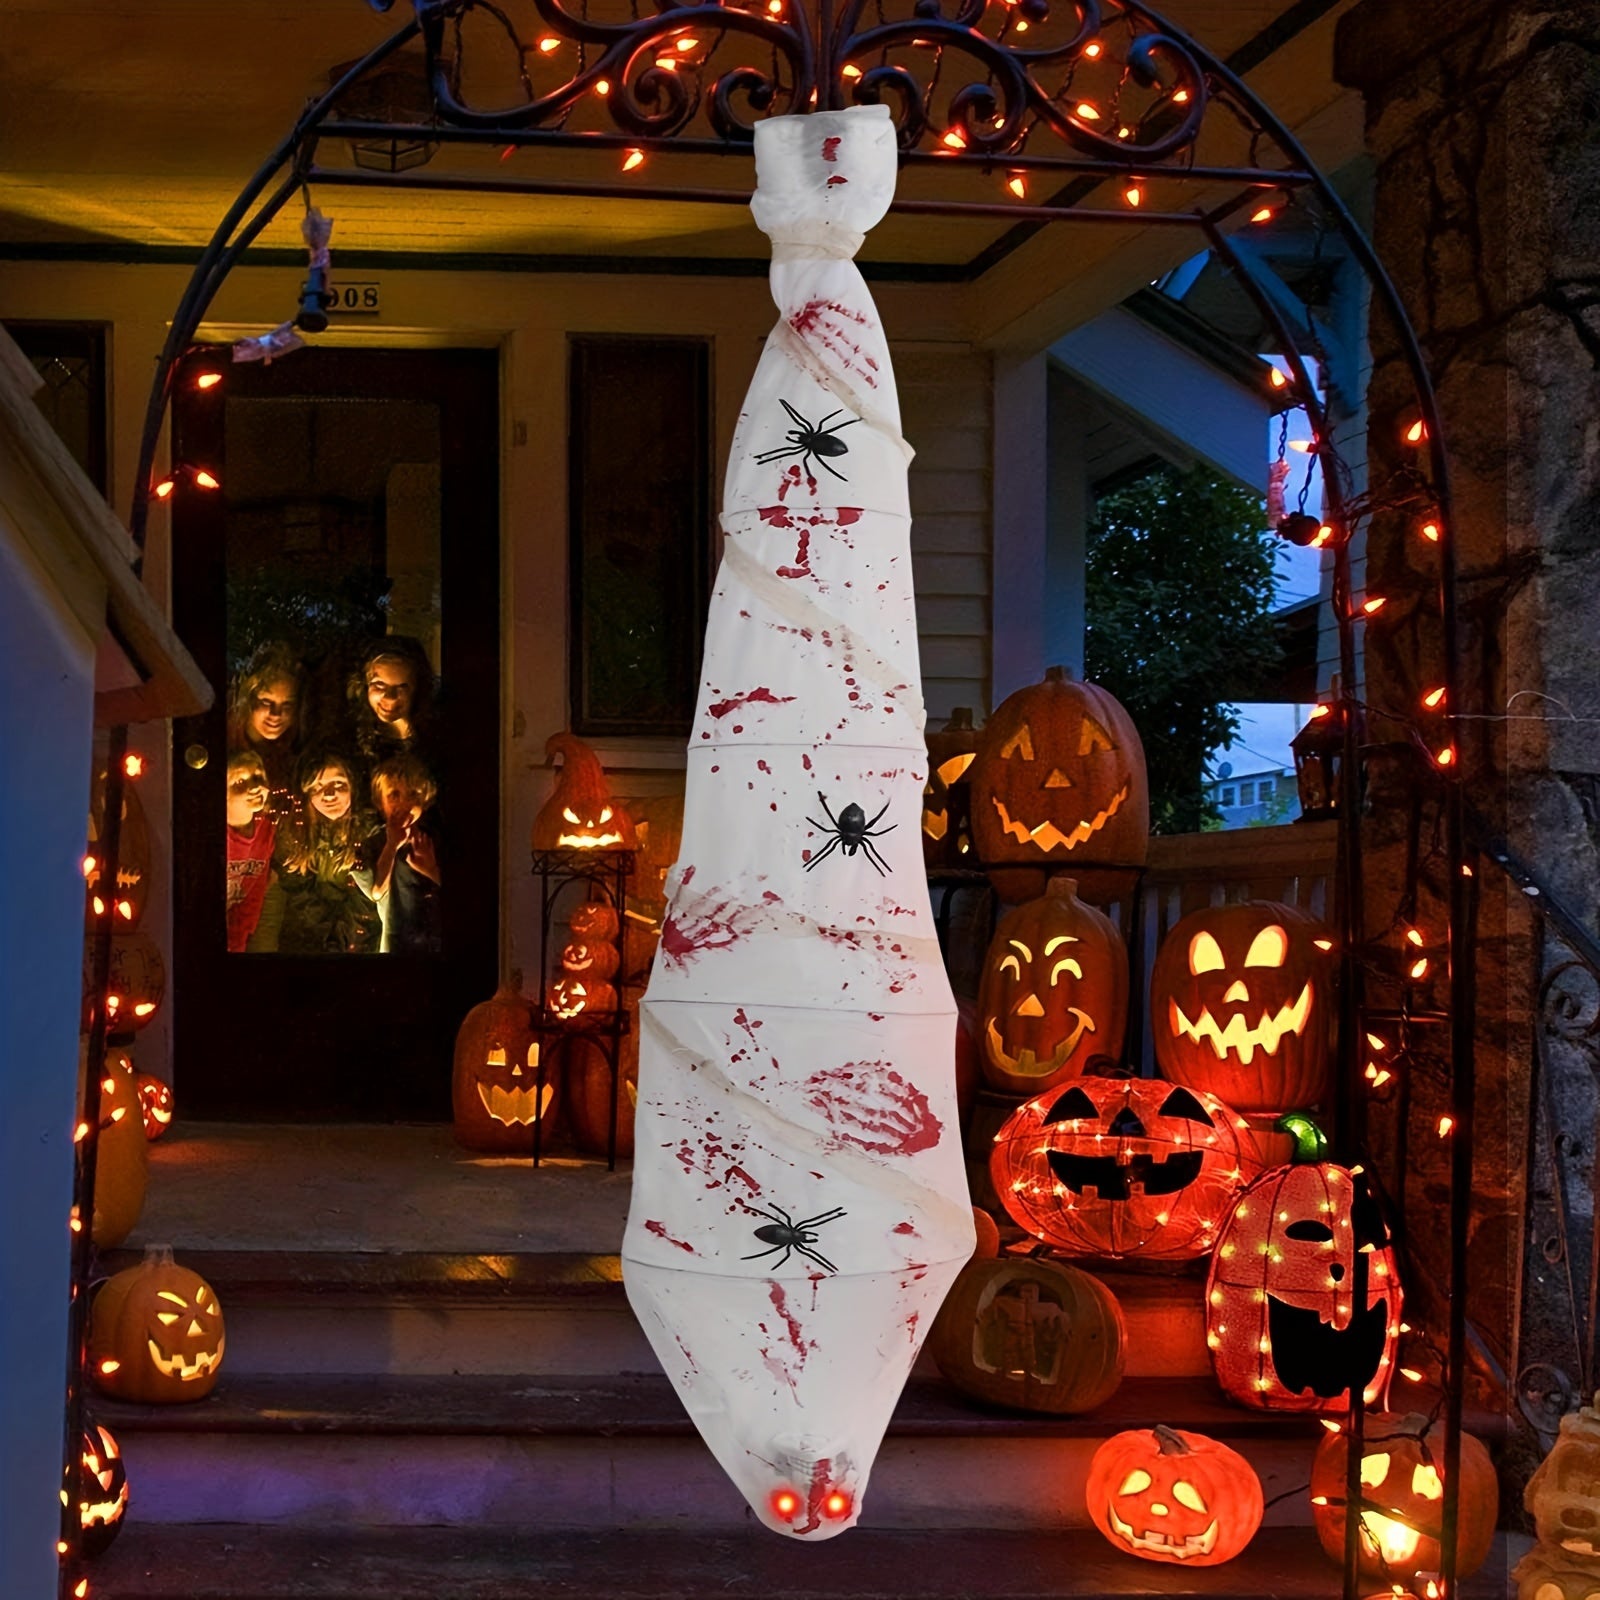 1pc, Halloween Decorations Hanging Corpse, Outdoor Hanging Scary Cocoon Corpse Ghost, LED Light Spooky Creepy Mummy For Indoor Outdoor Halloween Decor, Party, Yard, Tree, Door, Home, Haunted House Decoration(72Inch)